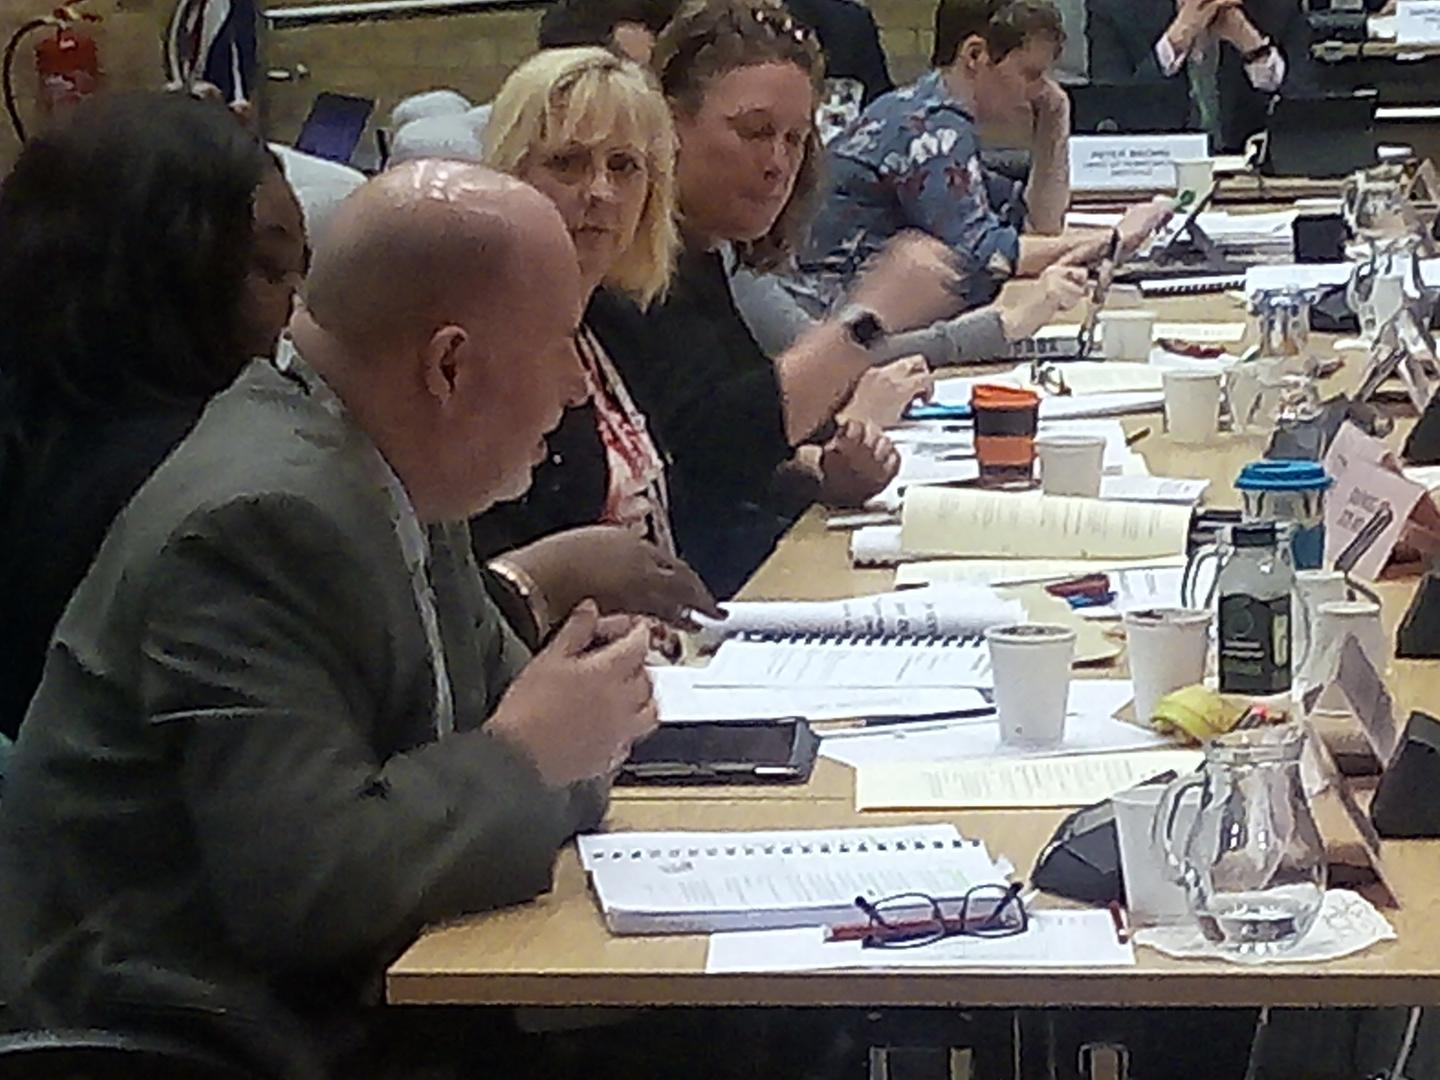 Cllr Nigel Long (Lab, Bletchley West), the councils elected housing chief, proposed increasing rents for council houses by 2.7 per cent, an average increase of 2.32 per week. This went through as part of the budget.